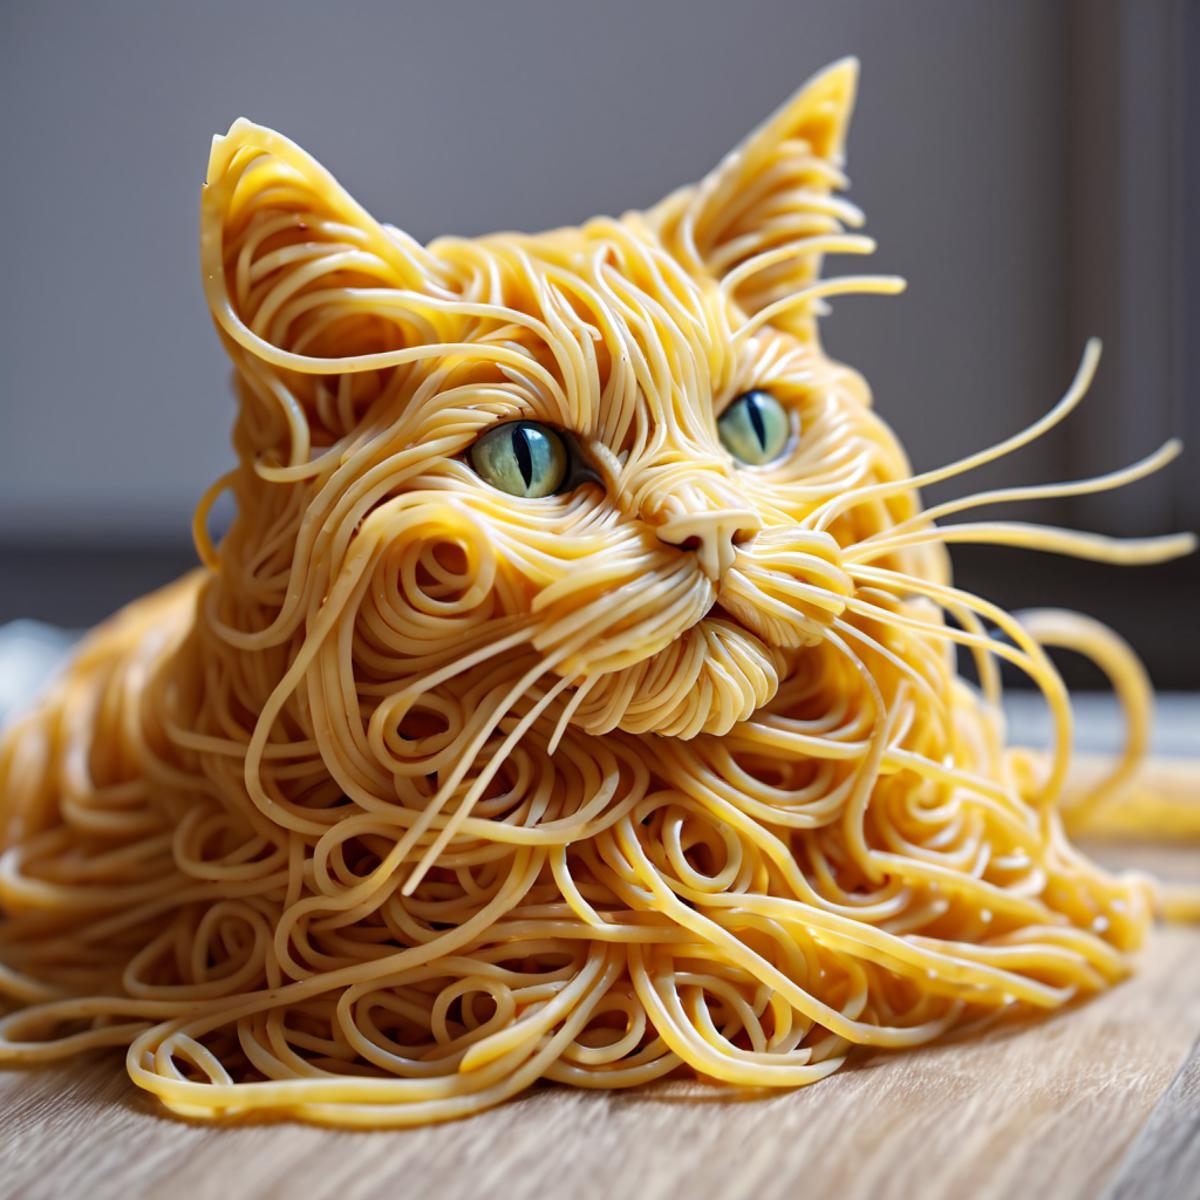 A cat made out of spaghetti noodles.